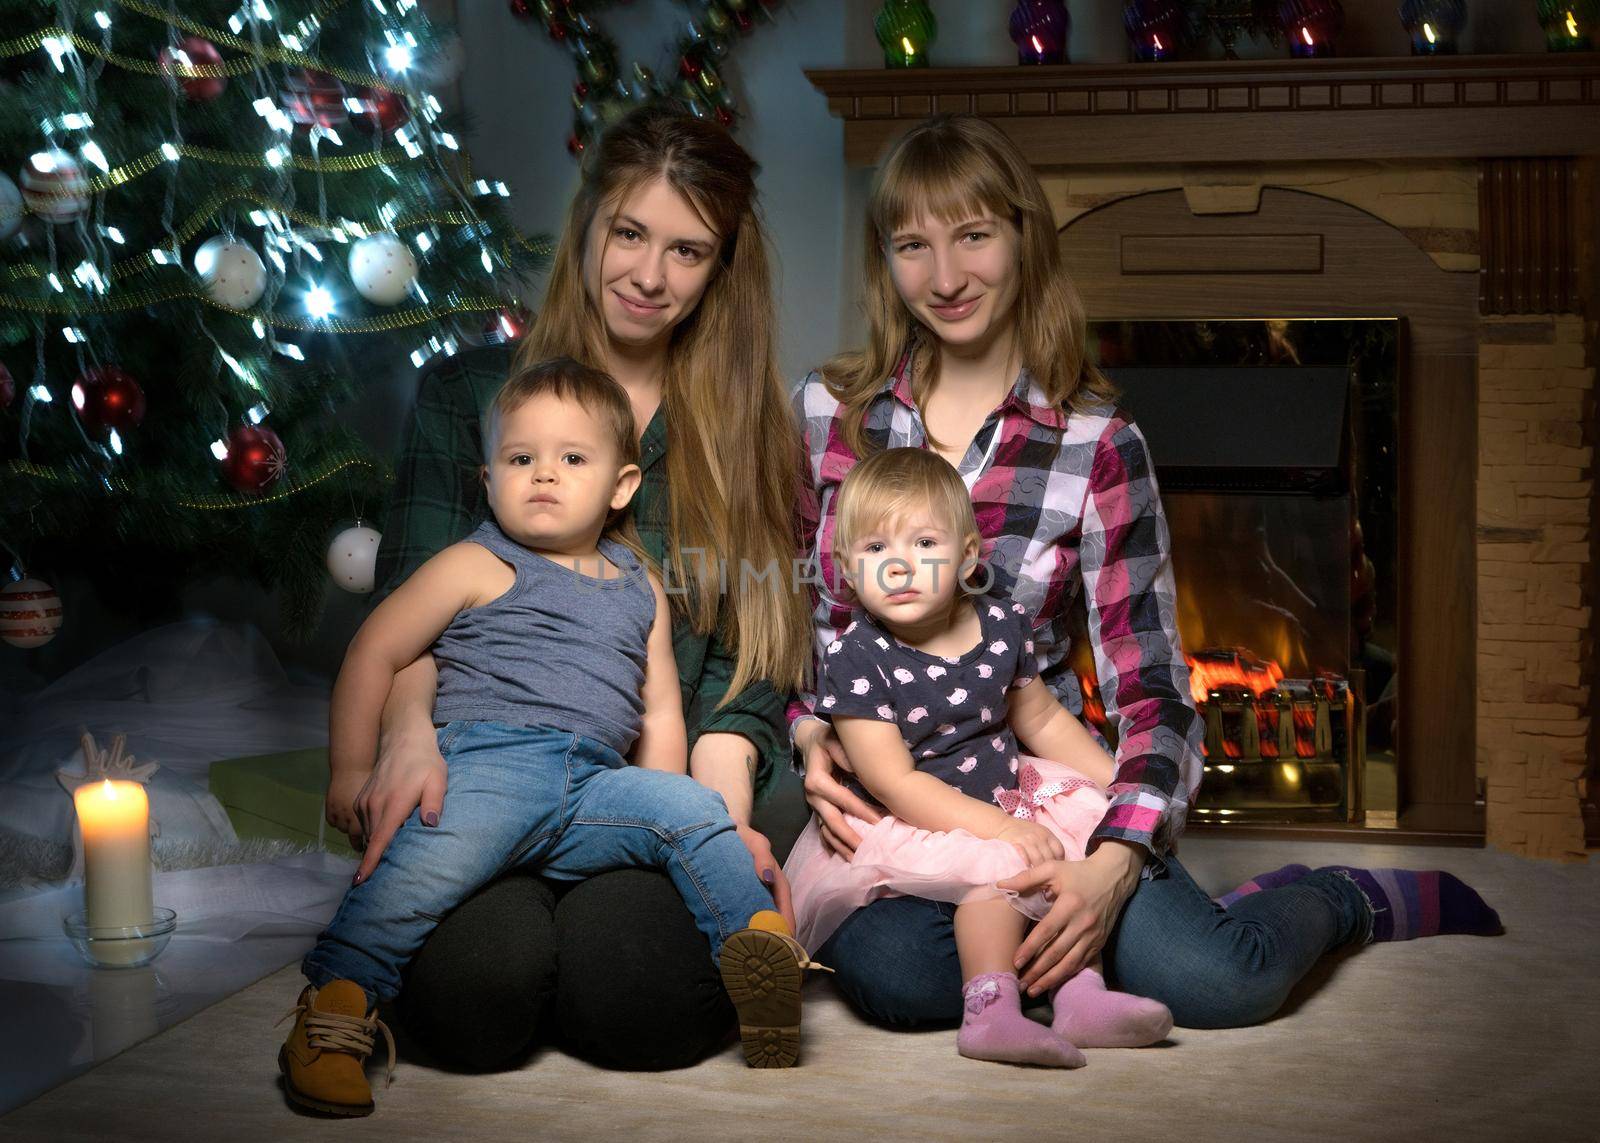 Young mothers with children at the Christmas tree. by kolesnikov_studio